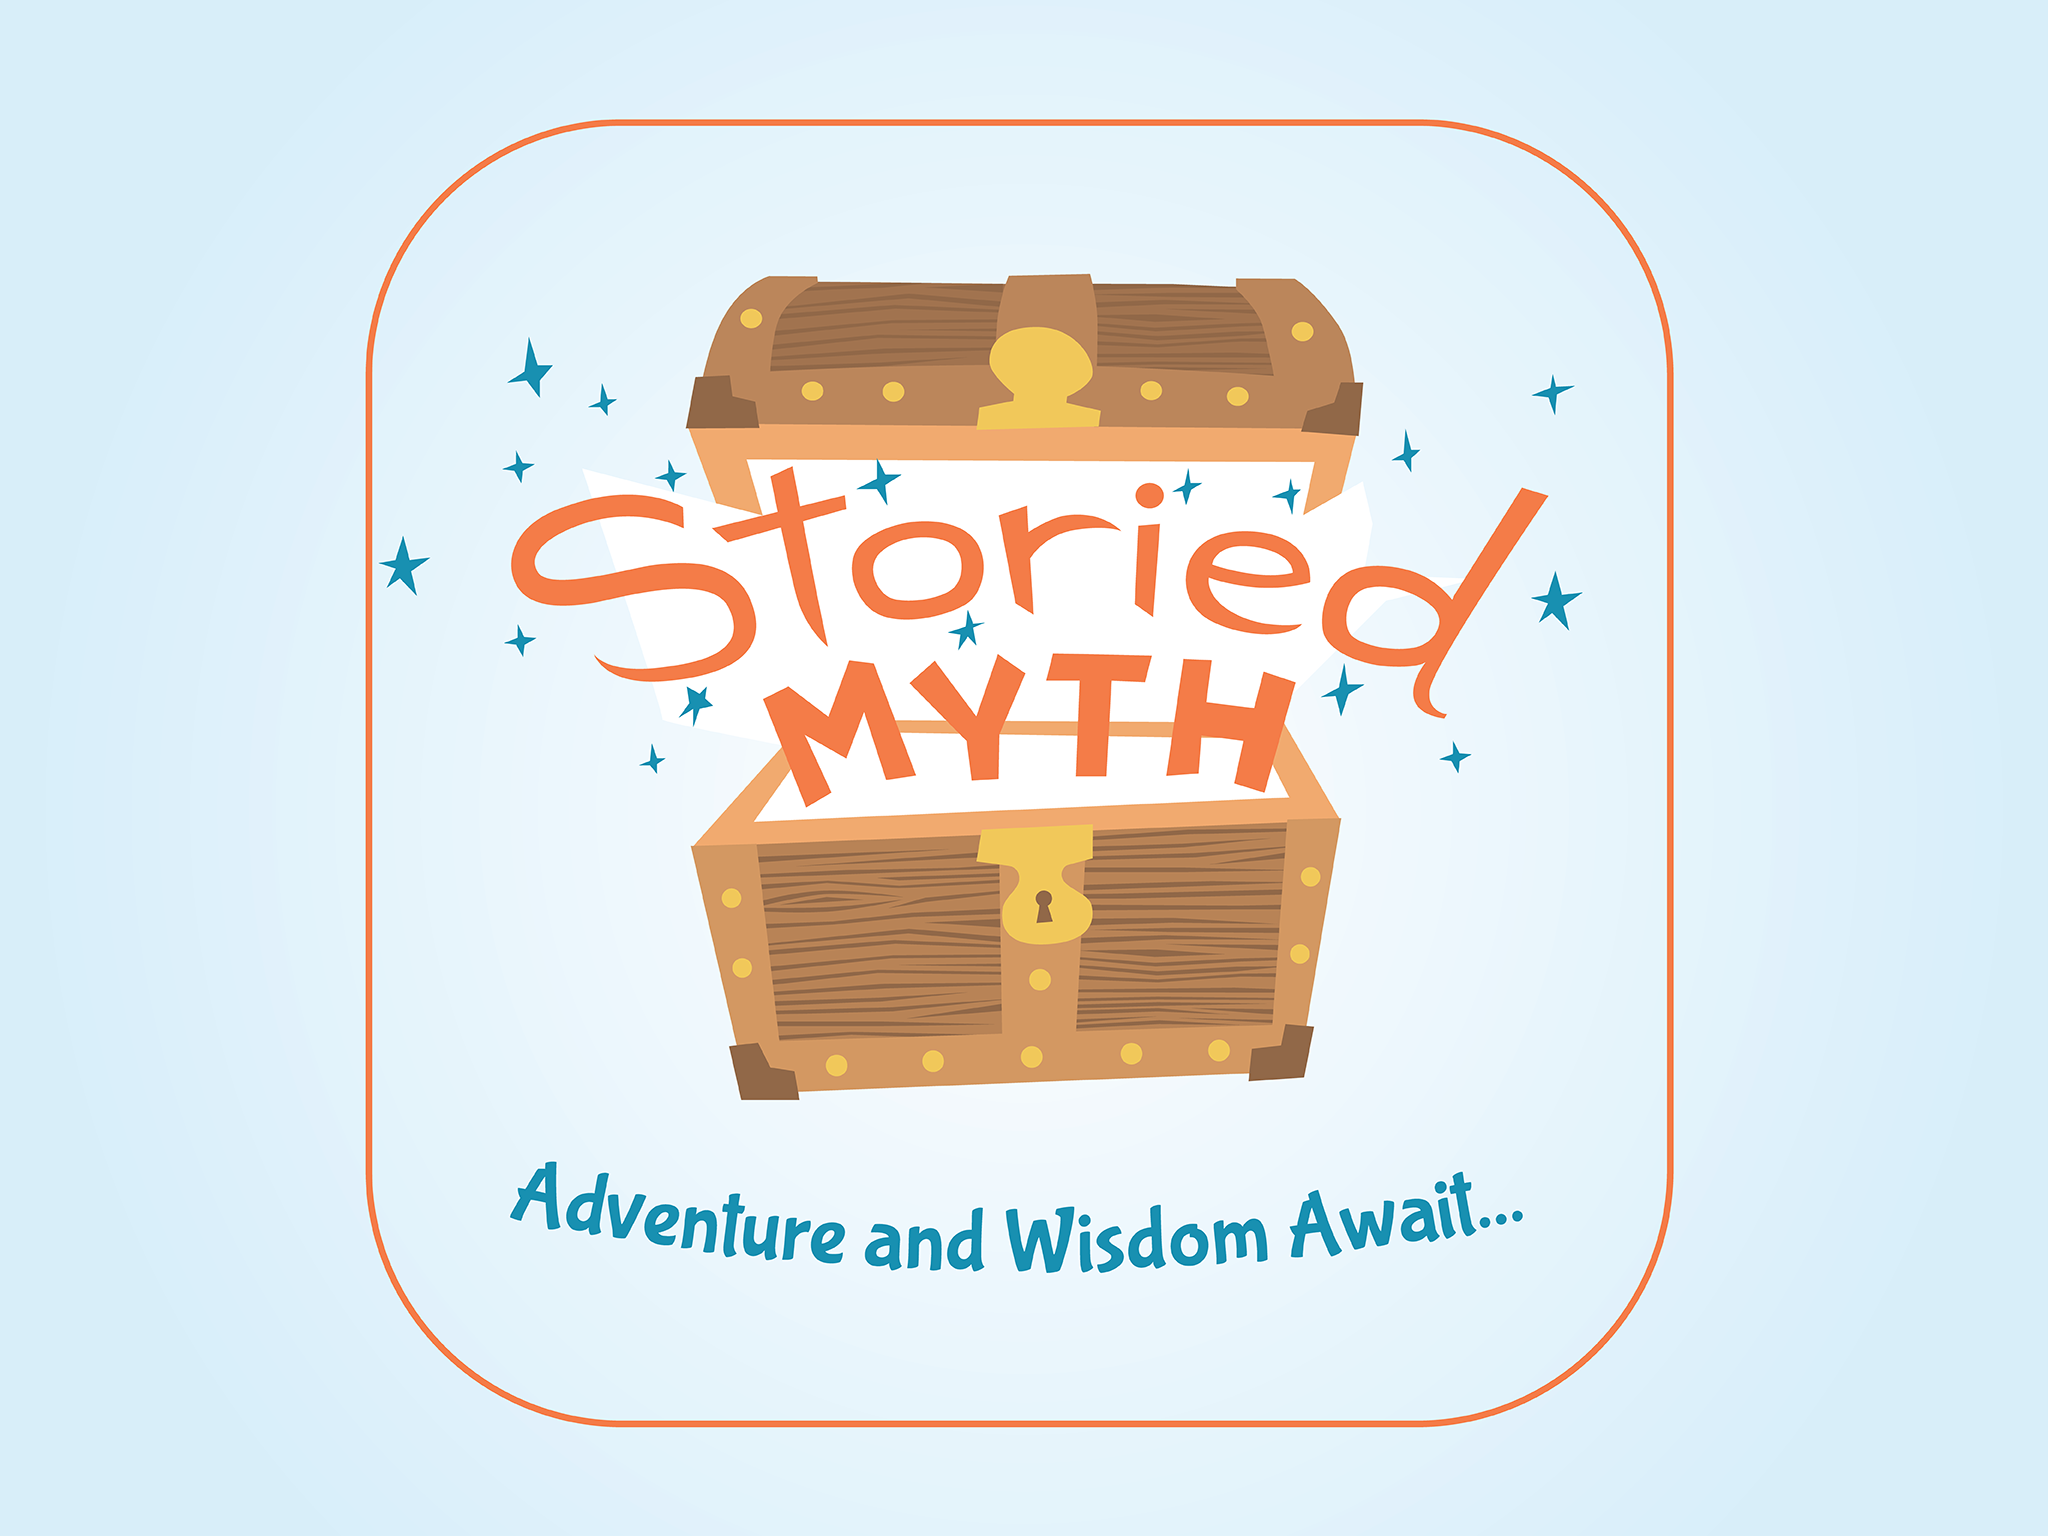 Don't let your children spend the summer stuck in front of the television. Introduce them to Storied Myth and have them join in on the fun.